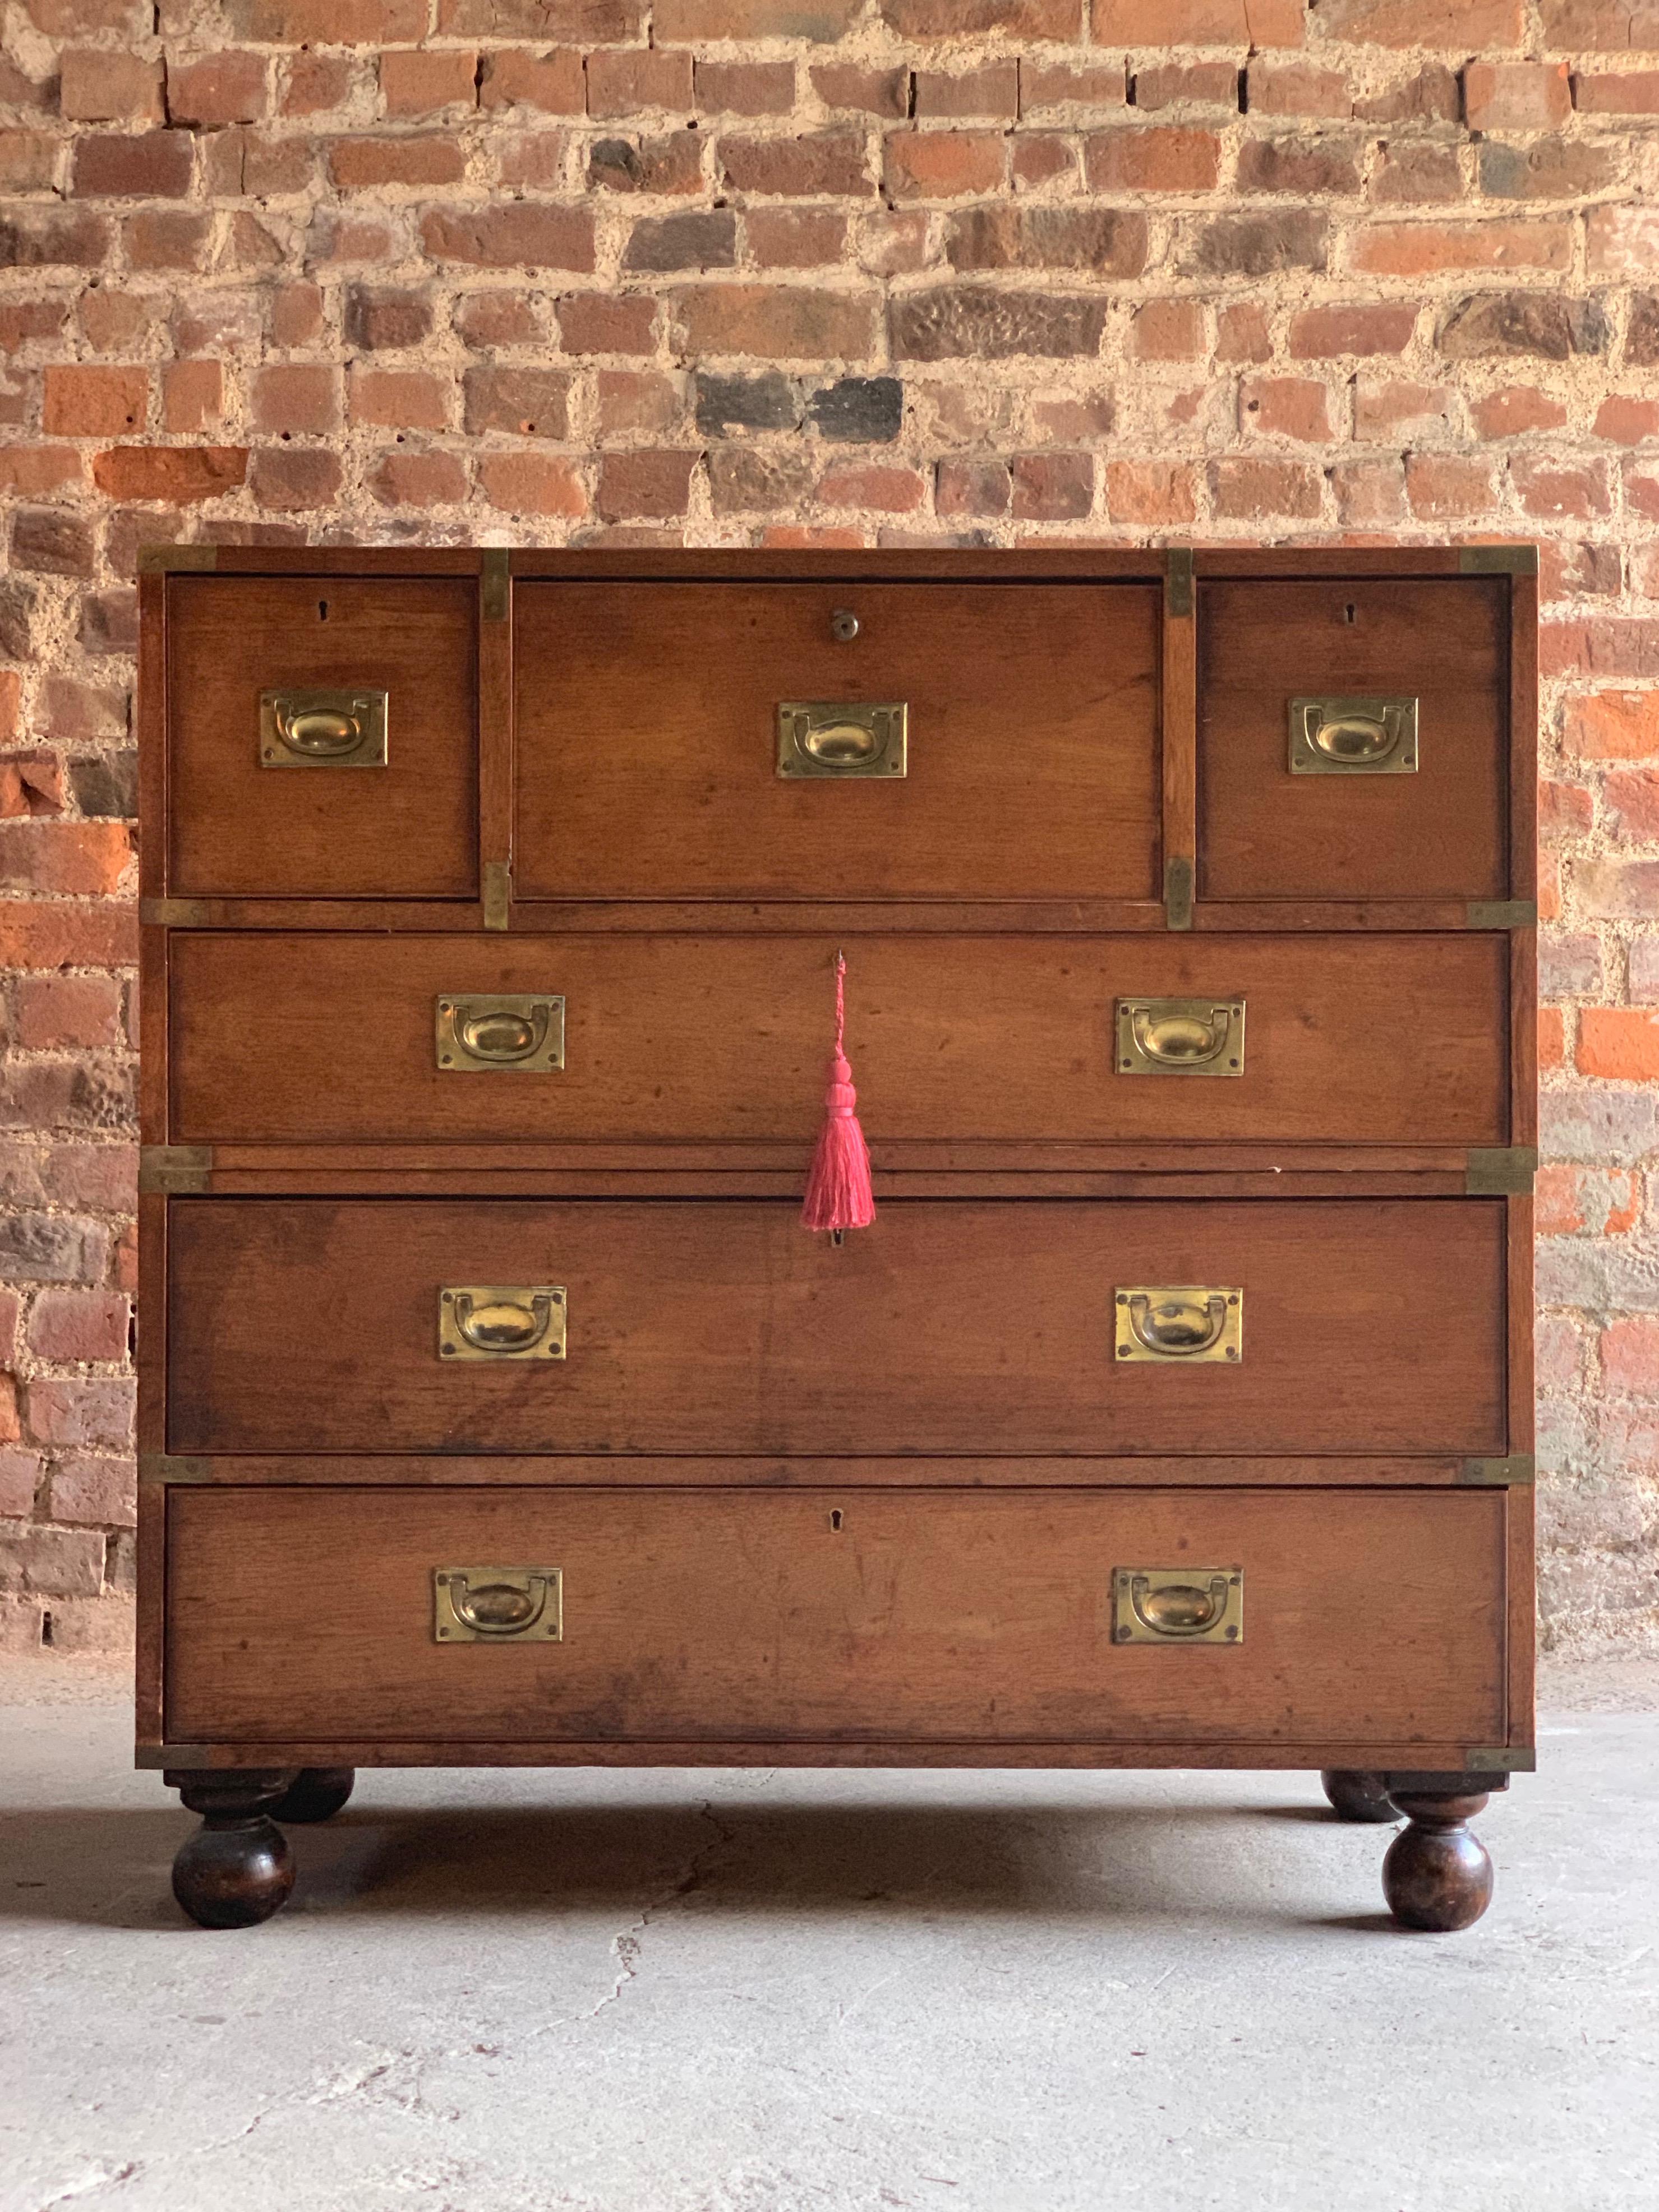 Military Campaign secretaire chest of drawers Victorian (circa 1890) number 30

Military Campaign secretaire chest of drawers Victorian 19th century, circa 1890, (Number 30) the two section chest with original flush mounted brass handles and